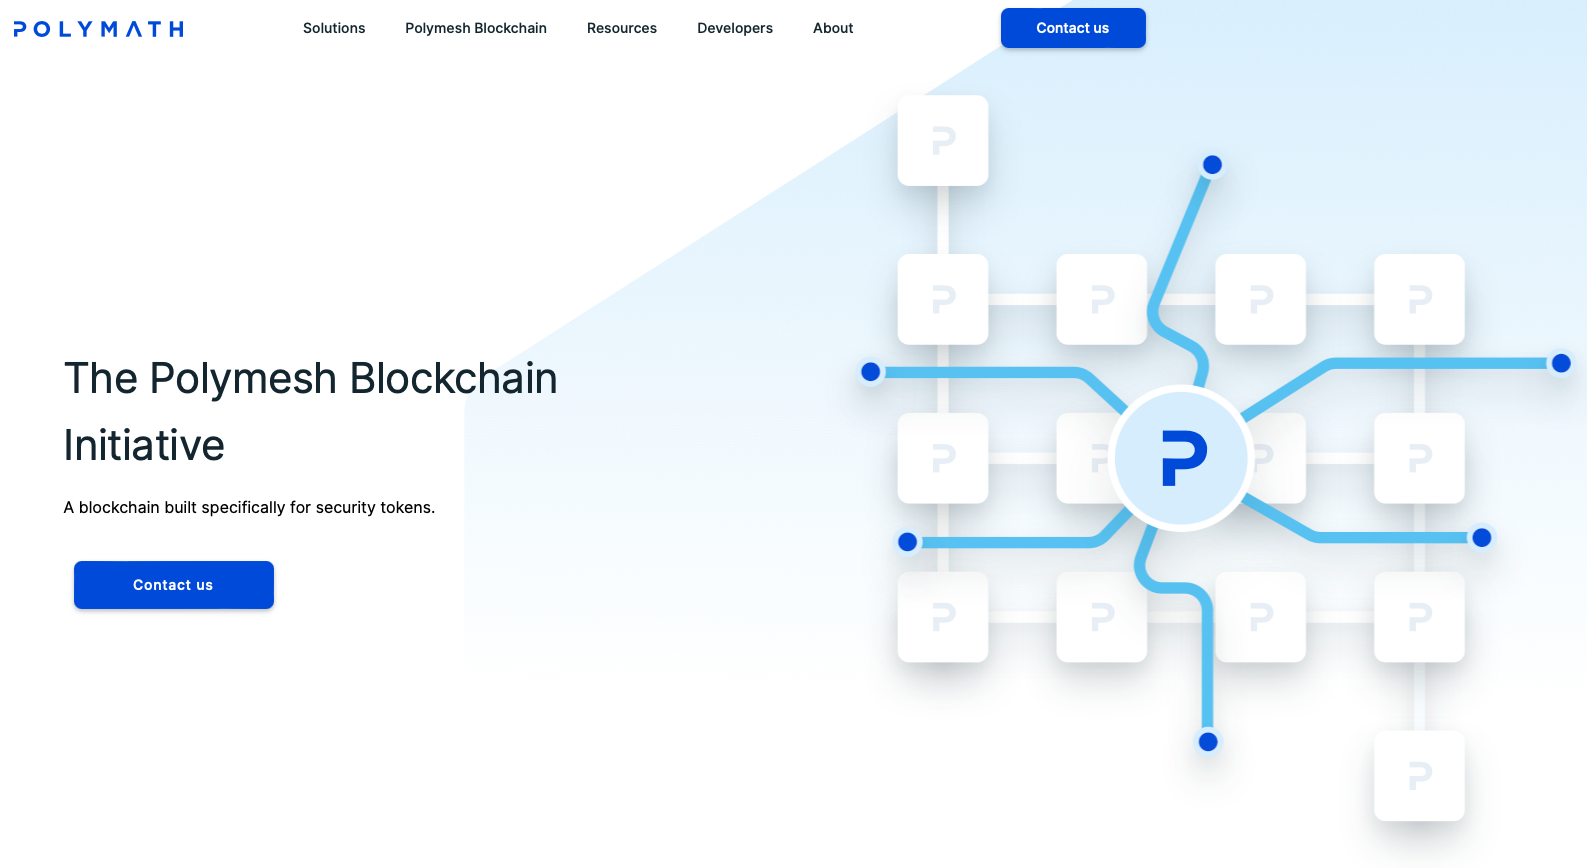 Screenshot of the Polymesh Blockchain diagram from the POLY website. 